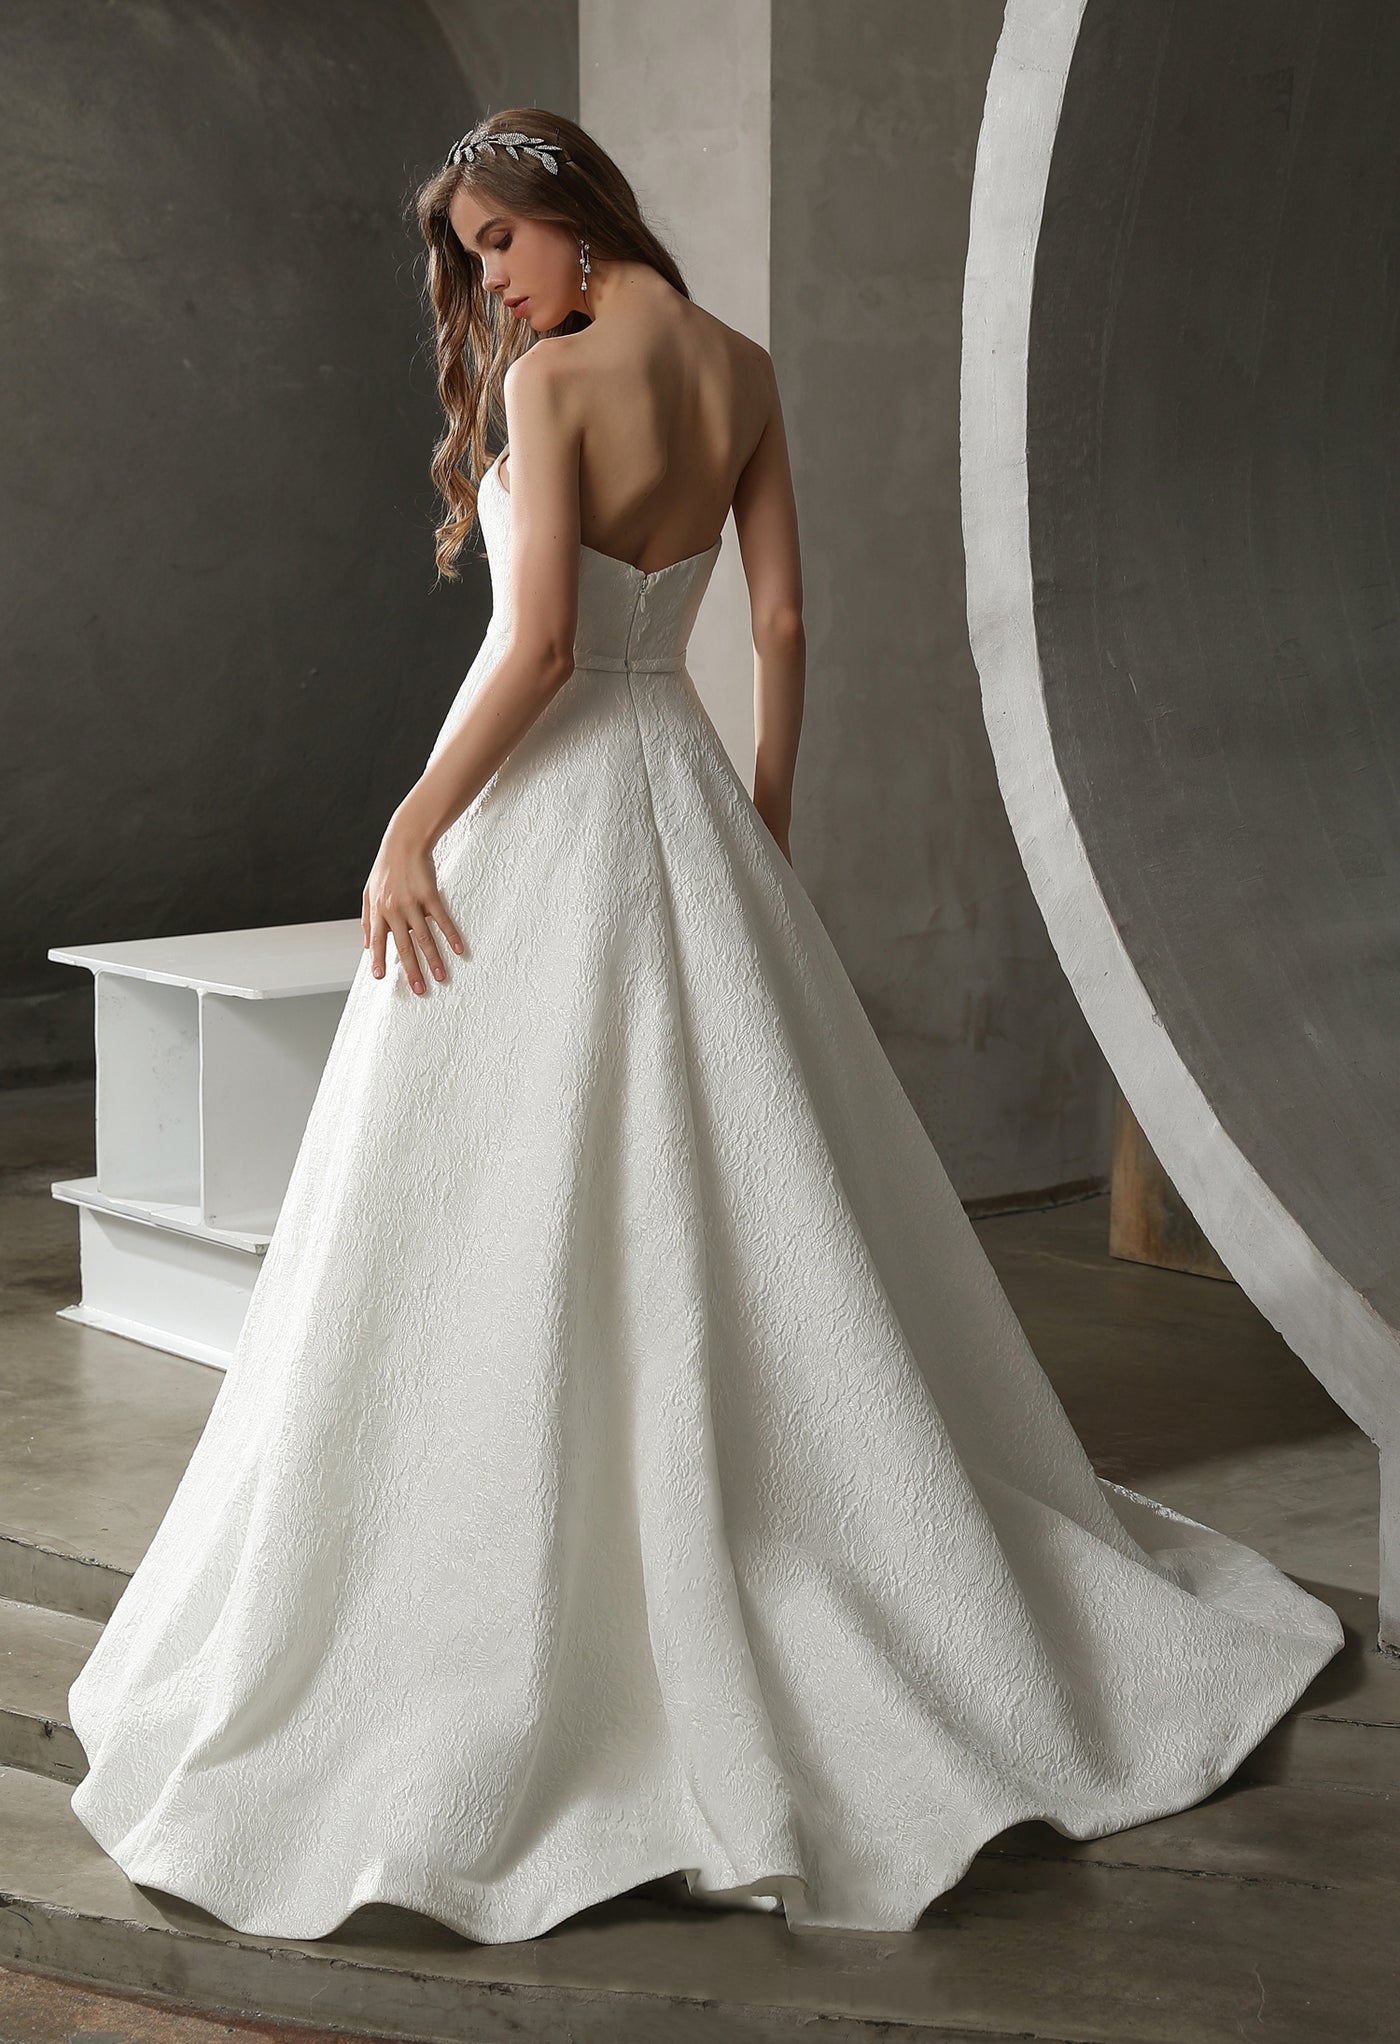 The back view of a woman in a Bergamot Bridal Strapless Ball Gown with Satin Jacquard and Detachable Puff Sleeves can be found at bridal shops in London.